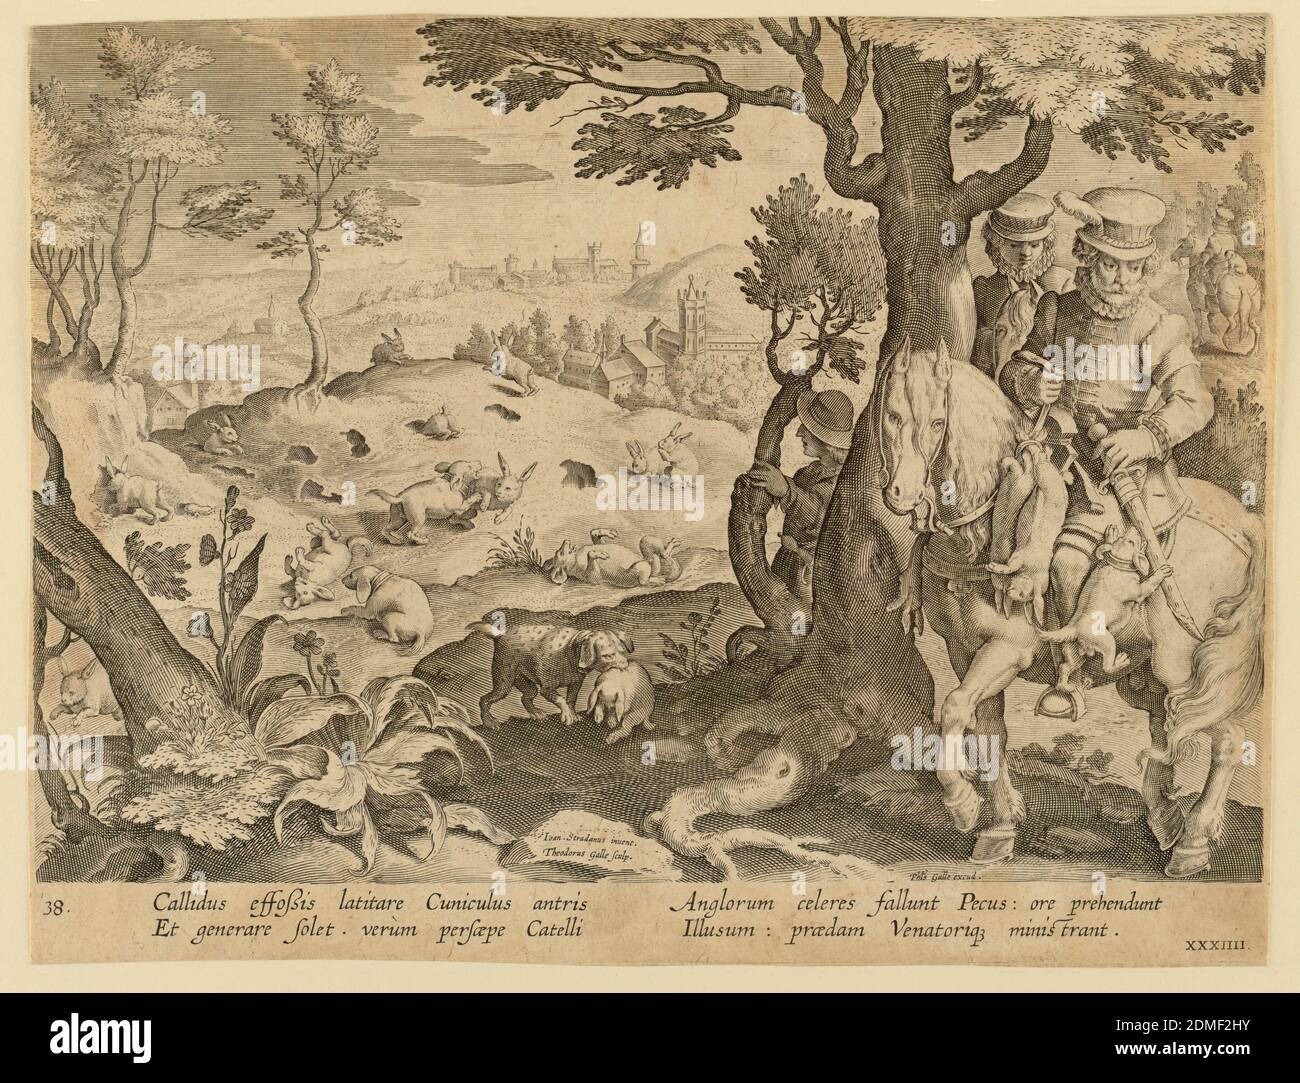 Rabbit hunt, Jan van der Straet, called Stradanus, Flemish, 1523–1605, Theodor Galle, ca. 1571 - 1633, Philips Galle, Flemish, 1537 - 1612, Engraving on paper, Horizontal rectangle. The dogs hunt and trap the rabbits, left, brining their kill tot he horsemen behind the tree, at right. On a rock, left center: 'Ioan. Stradanus invent. / Theodorus Galle Sculp.' At lower right: 'Phls. Galle excud.' Below: 'CALLIDUS EFFOSSIS LATITARE CUNICLULUS...', Netherlands, ca. 1595, figures, Print Stock Photo